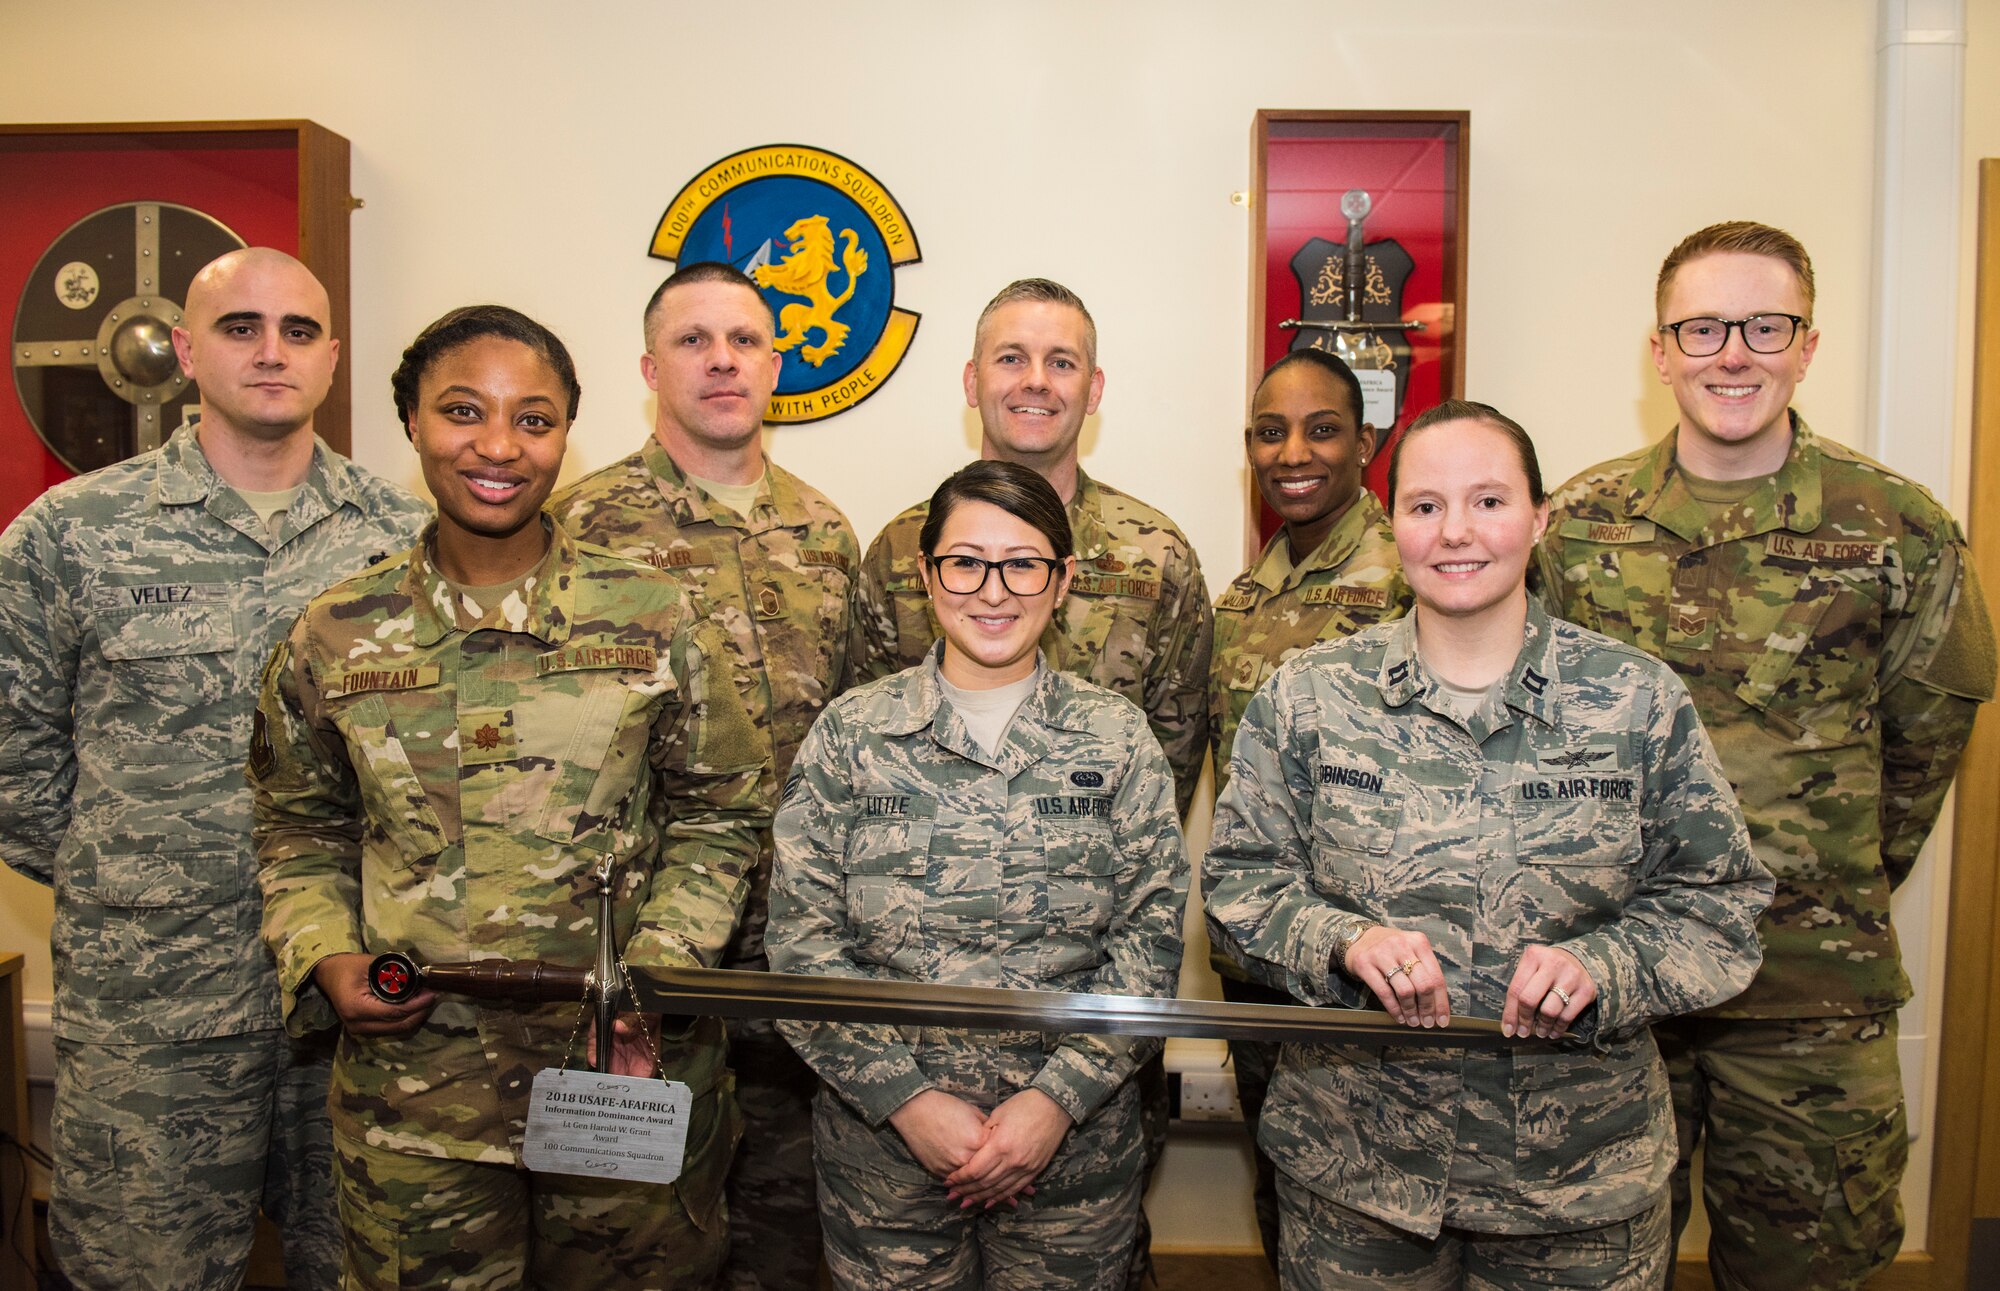 (First Row, From Left to Right) Maj. Erica Fountain (Commander), Senior Airman Aiko Little, Capt. Melissa Robinson, (Back Row, From Left to Right) Tech. Sgt. Ian Velez, Senior Master Sgt. Michael Miller, Chief Master Sgt. Jeremy Lindner, Senior Master Sgt. Lanora Waldron, and Staff Sgt. Matthew Wright, 100th Communications Squadron, pose with the Lt. Gen Harold W. Grant Award at RAF Mildenhall, Jan. 29, 2019. The Airmen were the squadron’s top performers for 2018. (U.S. Air Force Photo by Senior Airmen Kelly O’Connor)